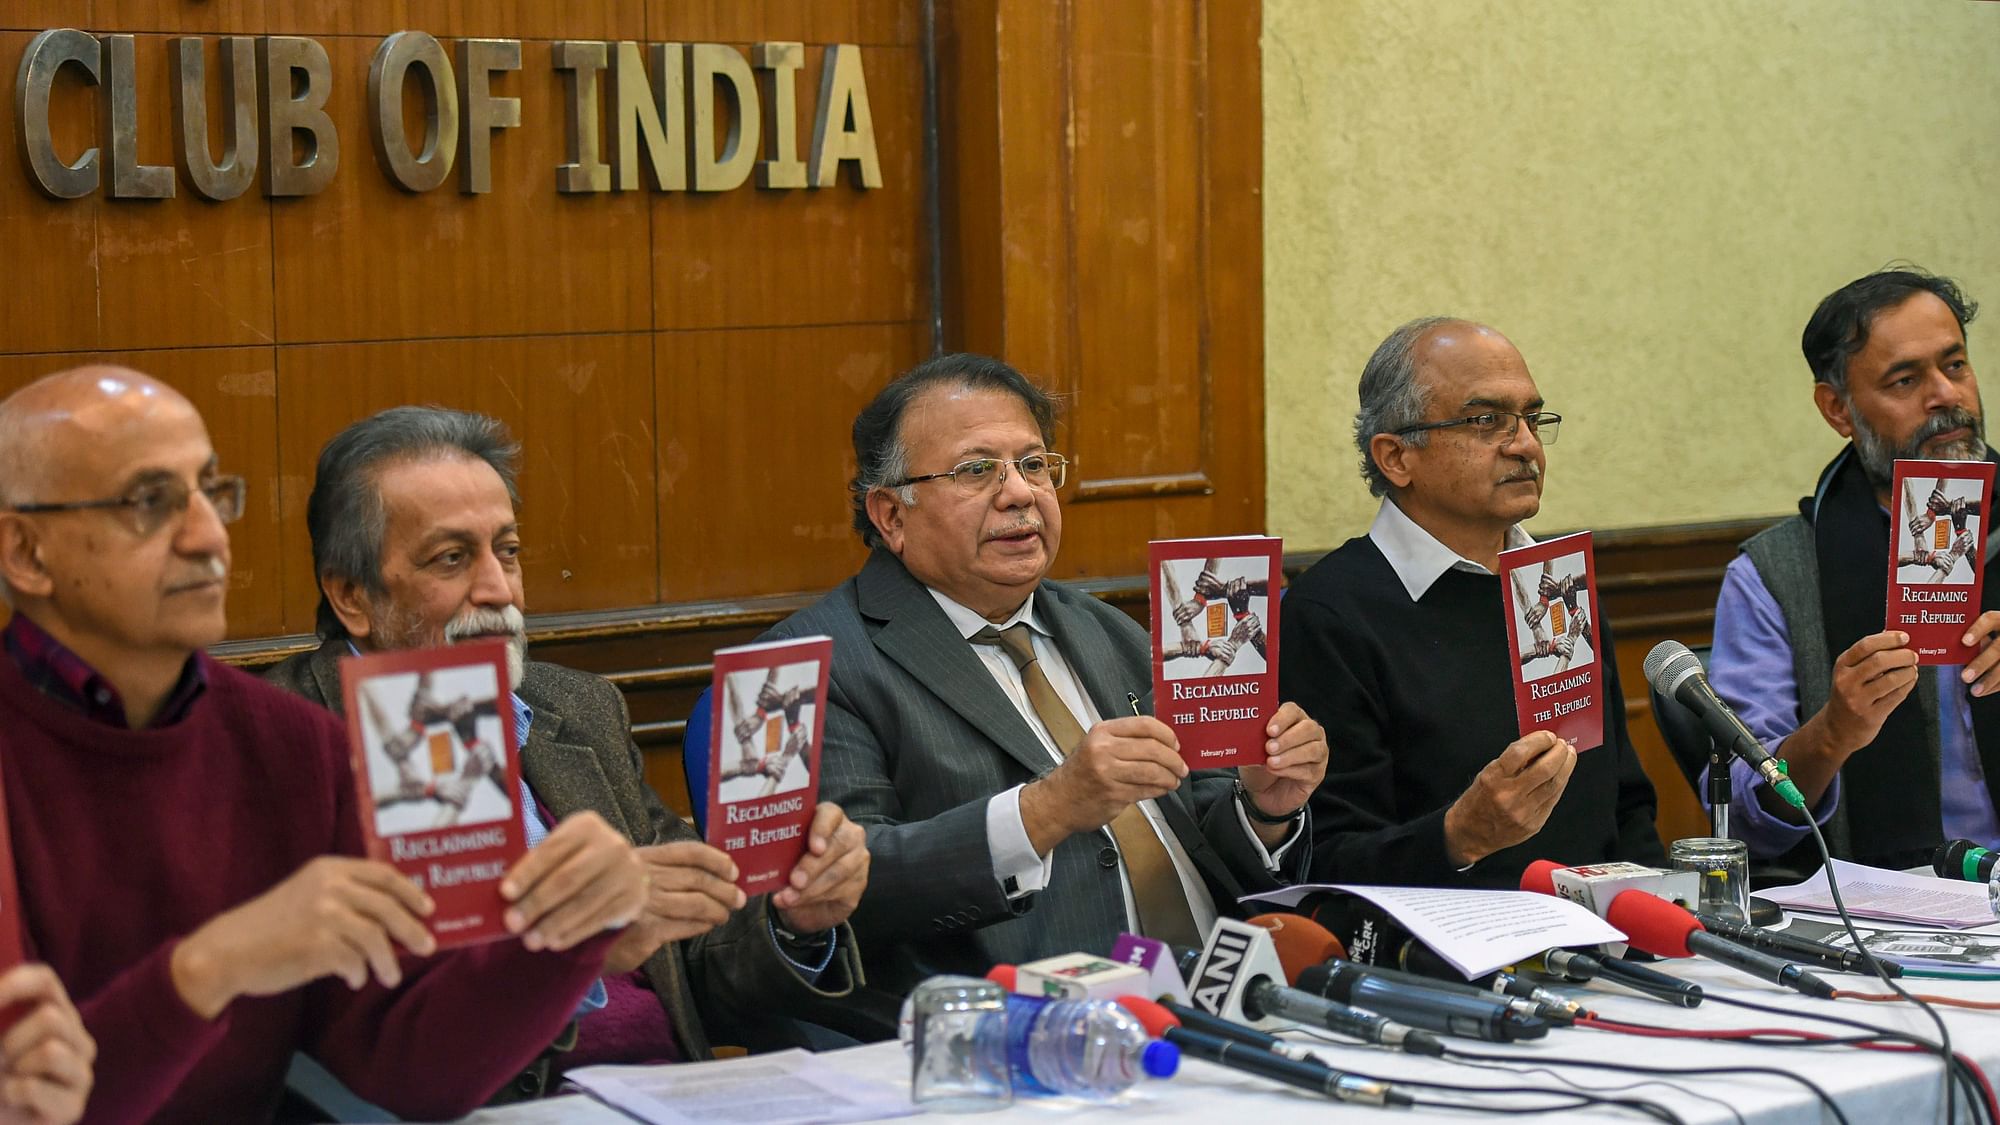 A group of eminent citizens have released a document under the Chairmanship of Justice AP Shah on Tuesday, 5 February, titled, ‘Reclaiming the Republic.’